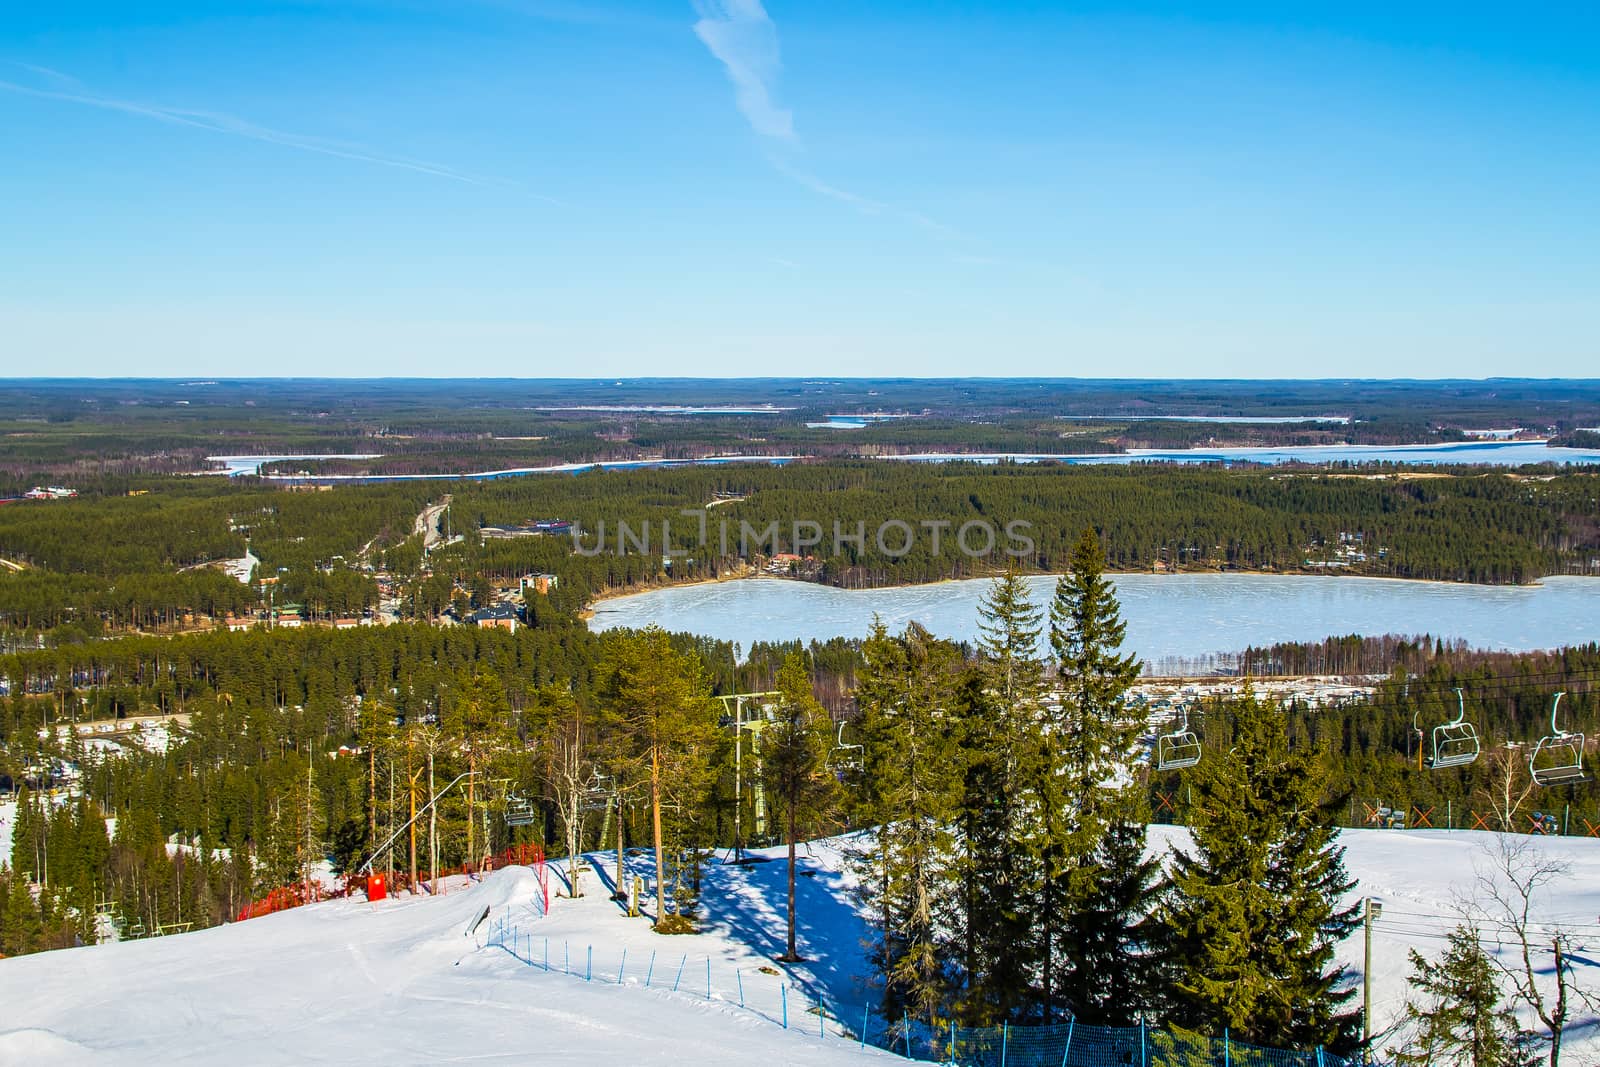 Scenic view over a ski slope by Alexanderphoto